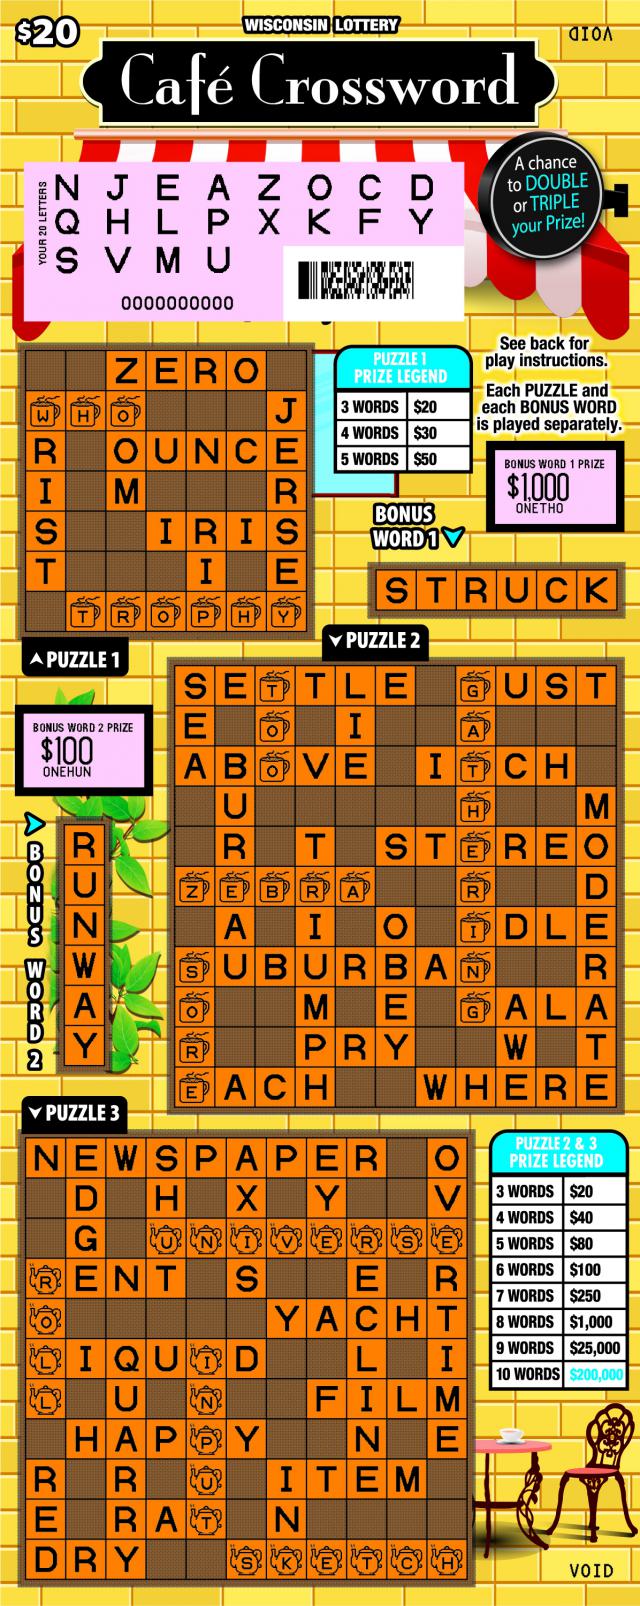 Cafe Crossword instant scratch ticket from Wisconsin Lottery - scratched